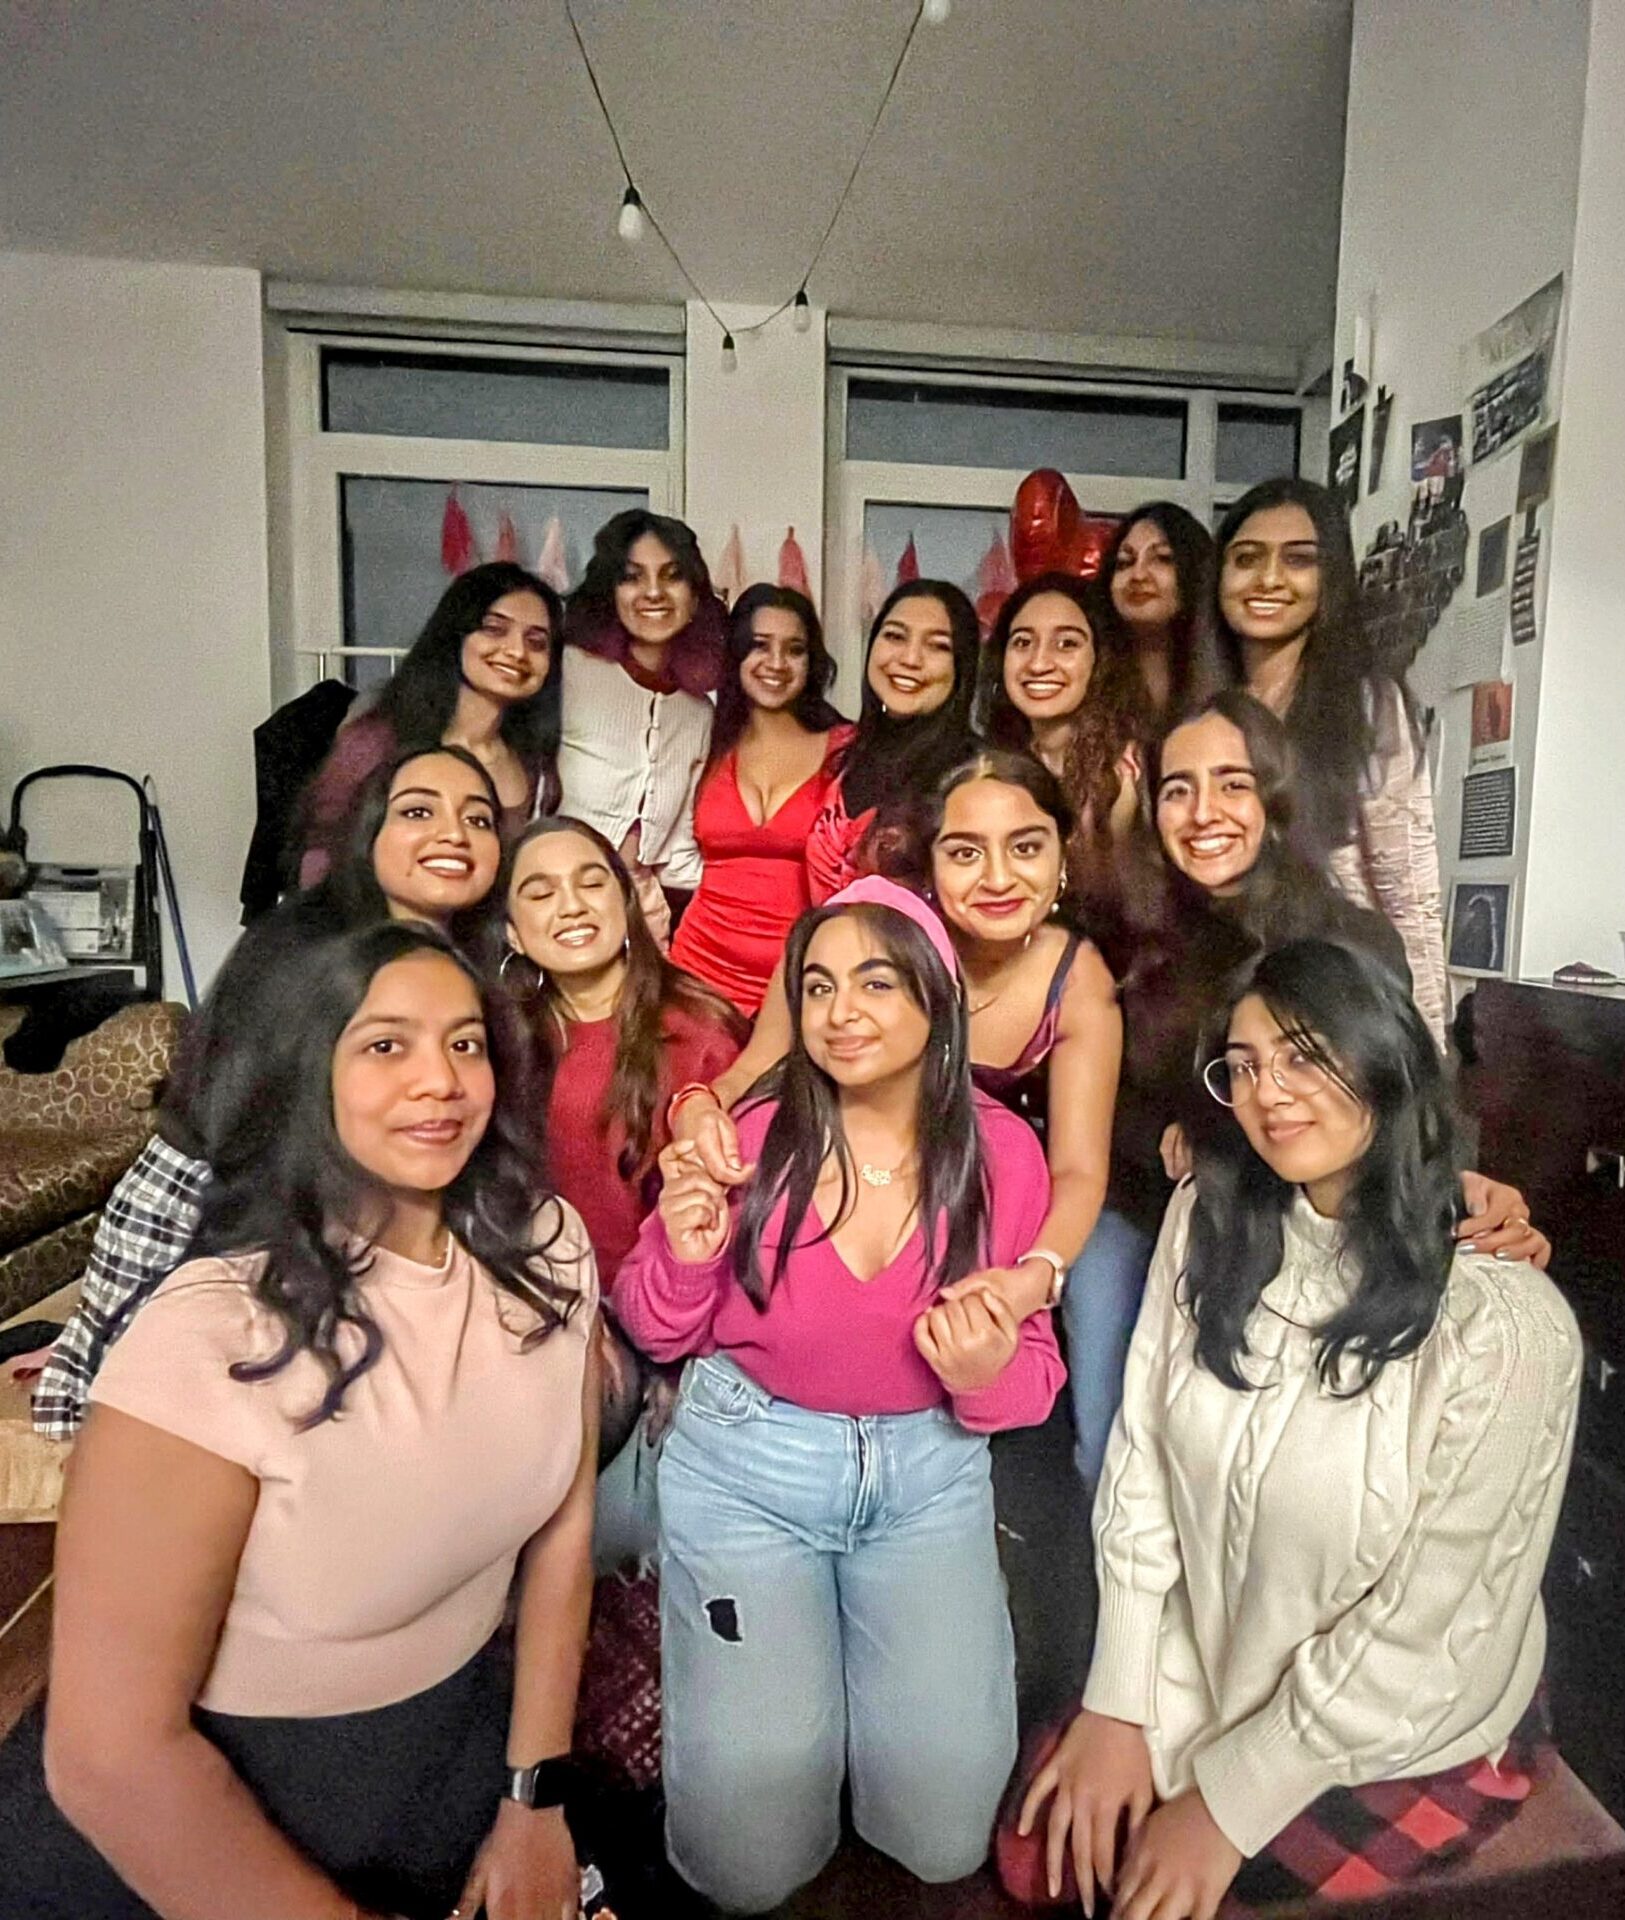 A bunch of girls gathered for a group photo